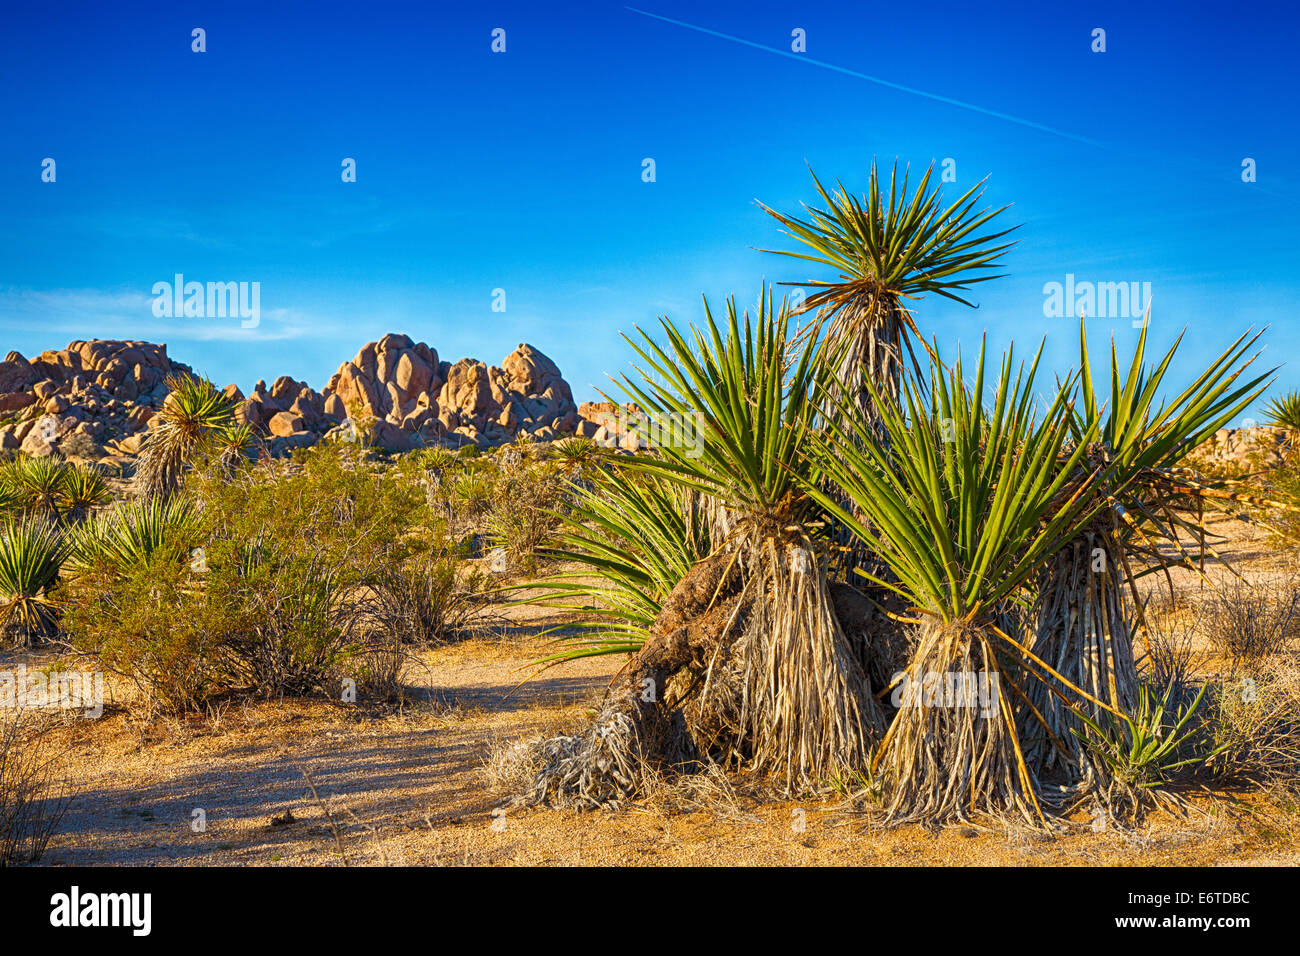 Landscape of boulders and yucca plants in Joshua Tree National Park, California Stock Photo